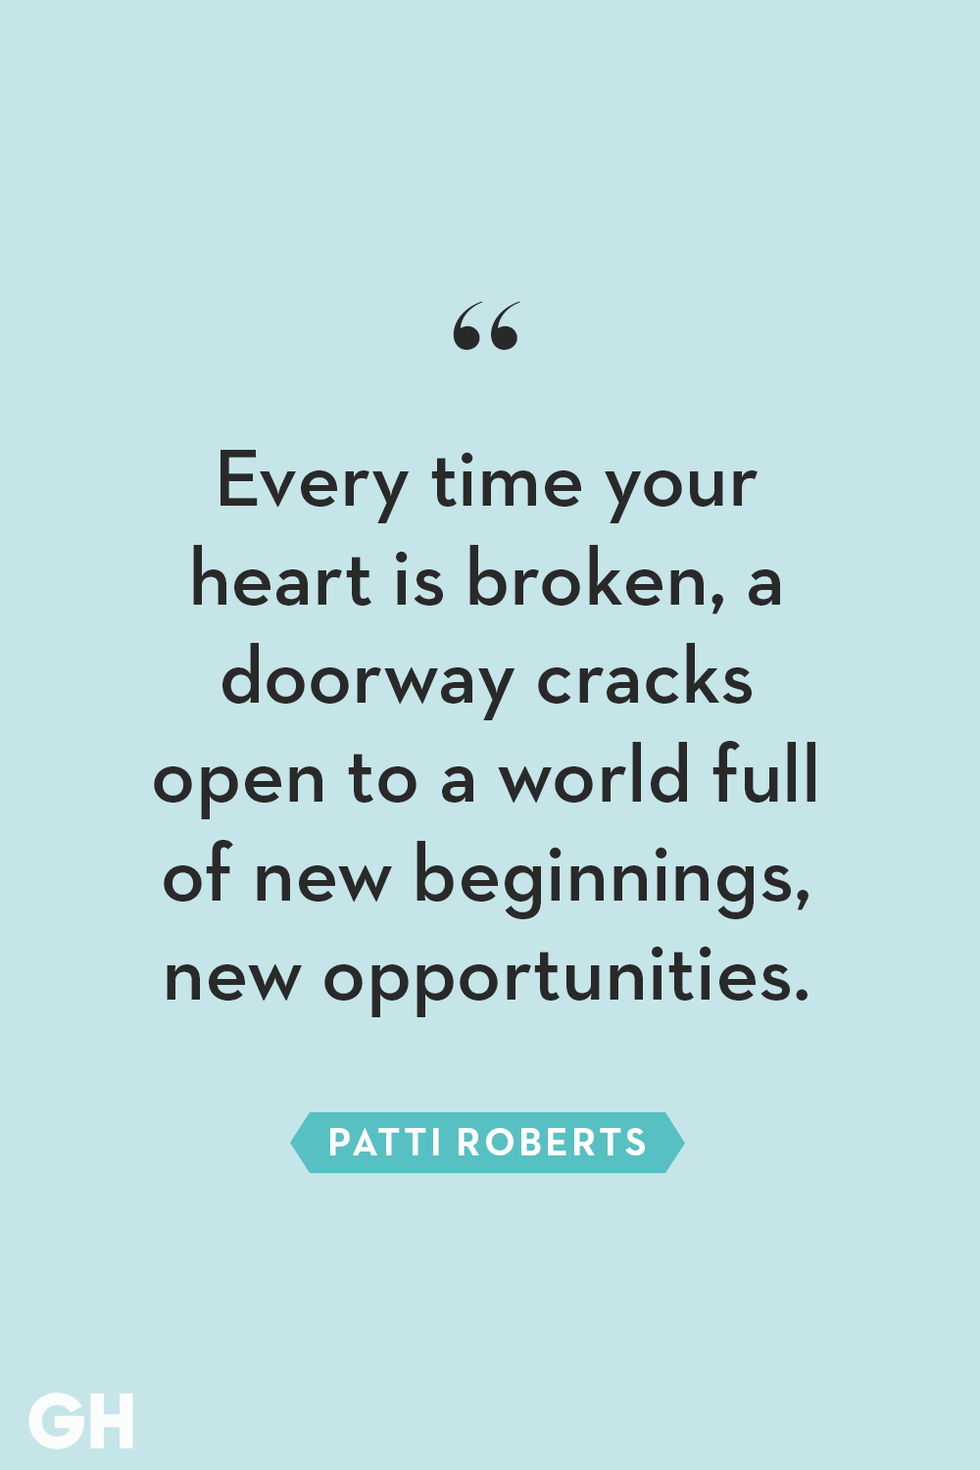 How Do You Mend a Broken Heart? 5 Tips to Help You Move On